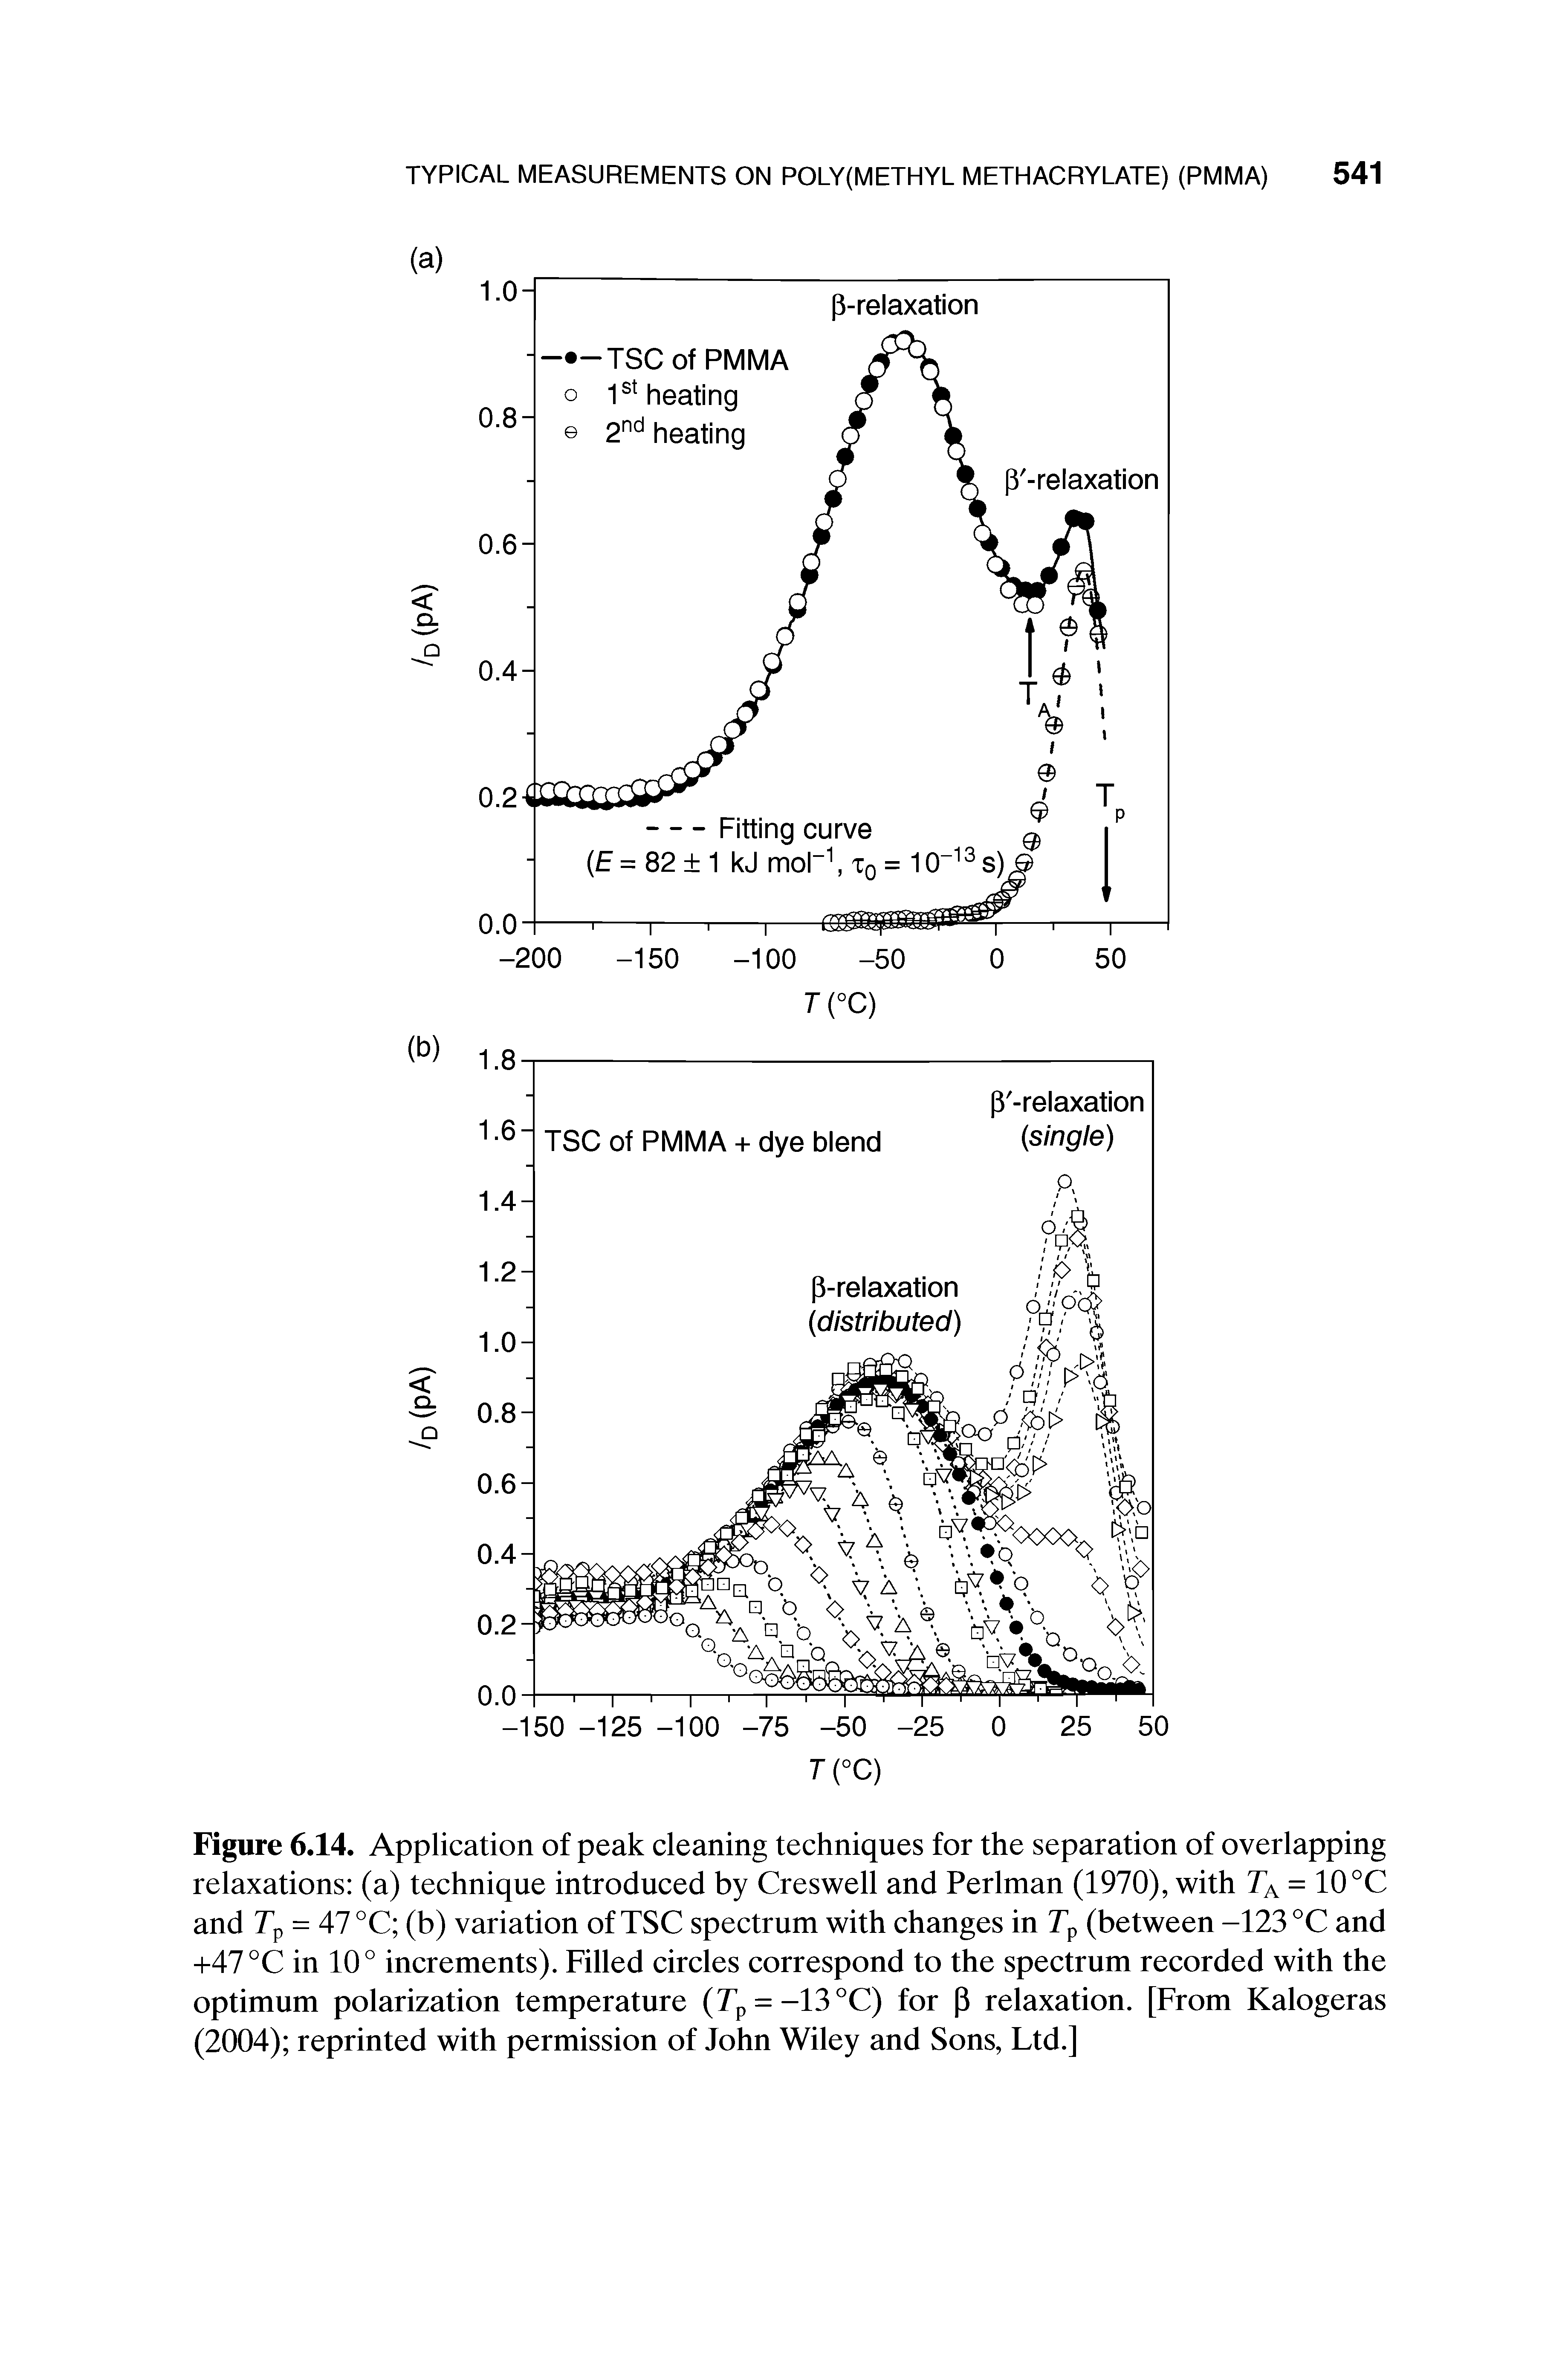 Figure 6.14. Application of peak cleaning techniques for the separation of overlapping relaxations (a) technique introduced by Creswell and Perlman (1970), with 7k = 10 °C and Tp = 47 °C (b) variation of TSC spectrum with changes in Tp (between -123 °C and +47 °C in 10° increments). Filled circles correspond to the spectrum recorded with the optimum polarization temperature (rp = -13°C) for p relaxation. [From Kalogeras (2004) reprinted with permission of John Wiley and Sons, Ltd.]...